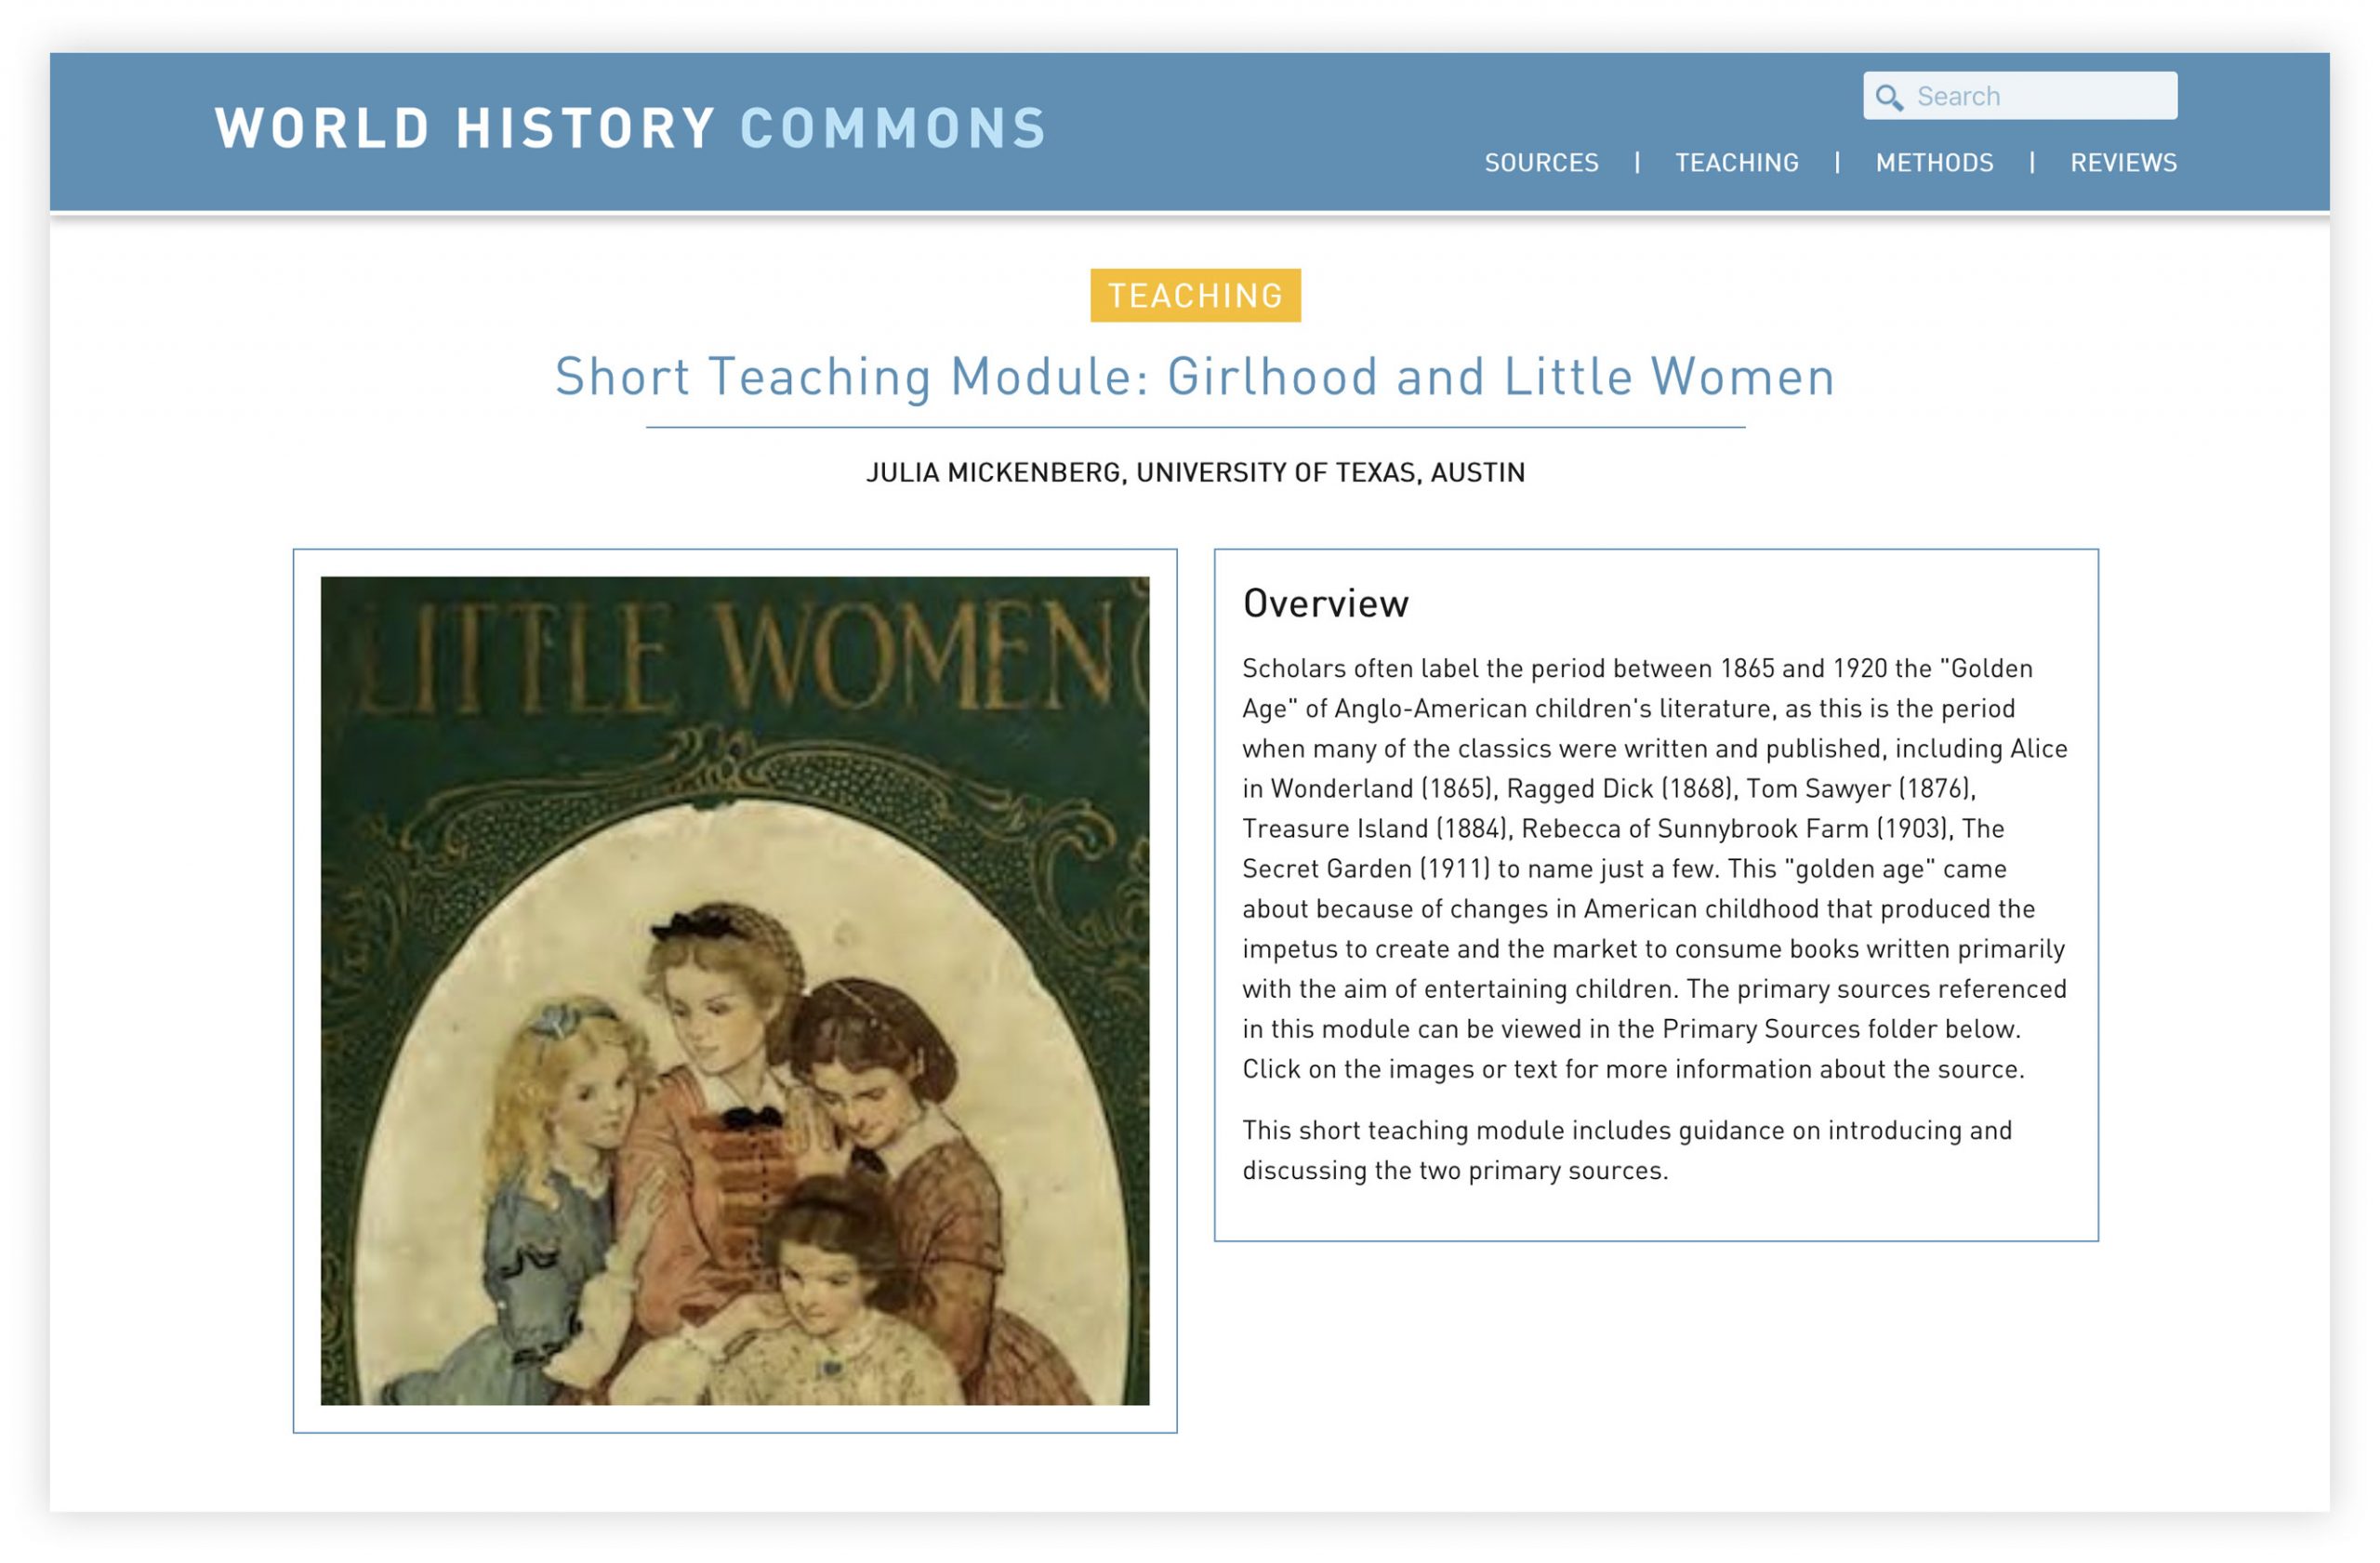 Screengrab from the World History Commons website Teaching page.